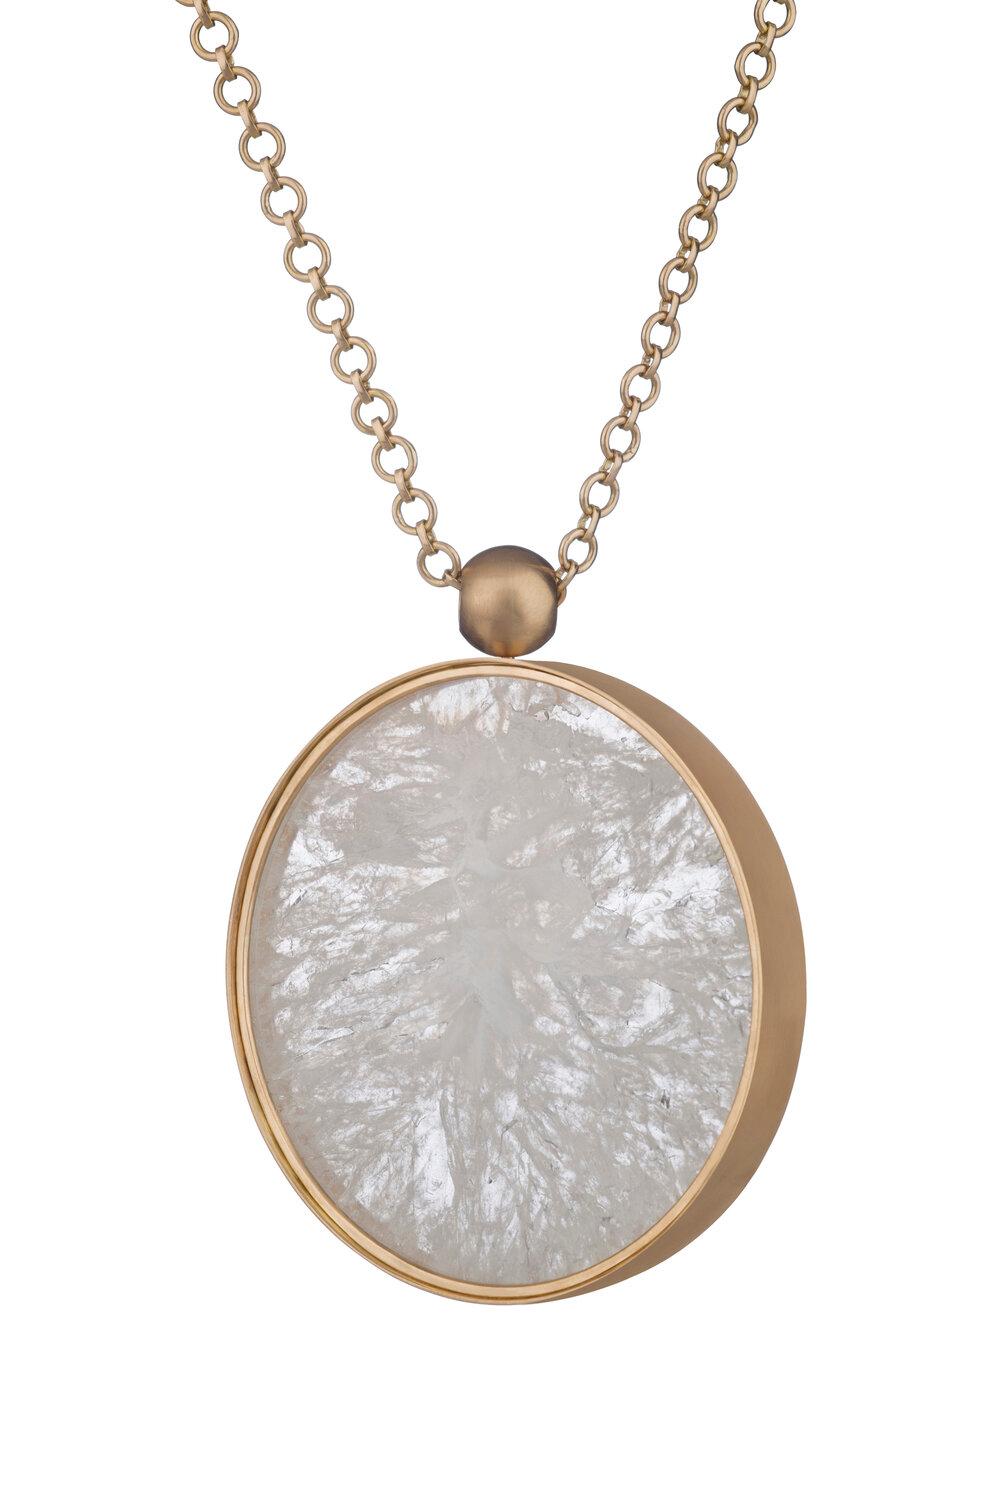 OUROBOROS white agate set in 18kt gold.

There are four chain options, all are handmade, 36